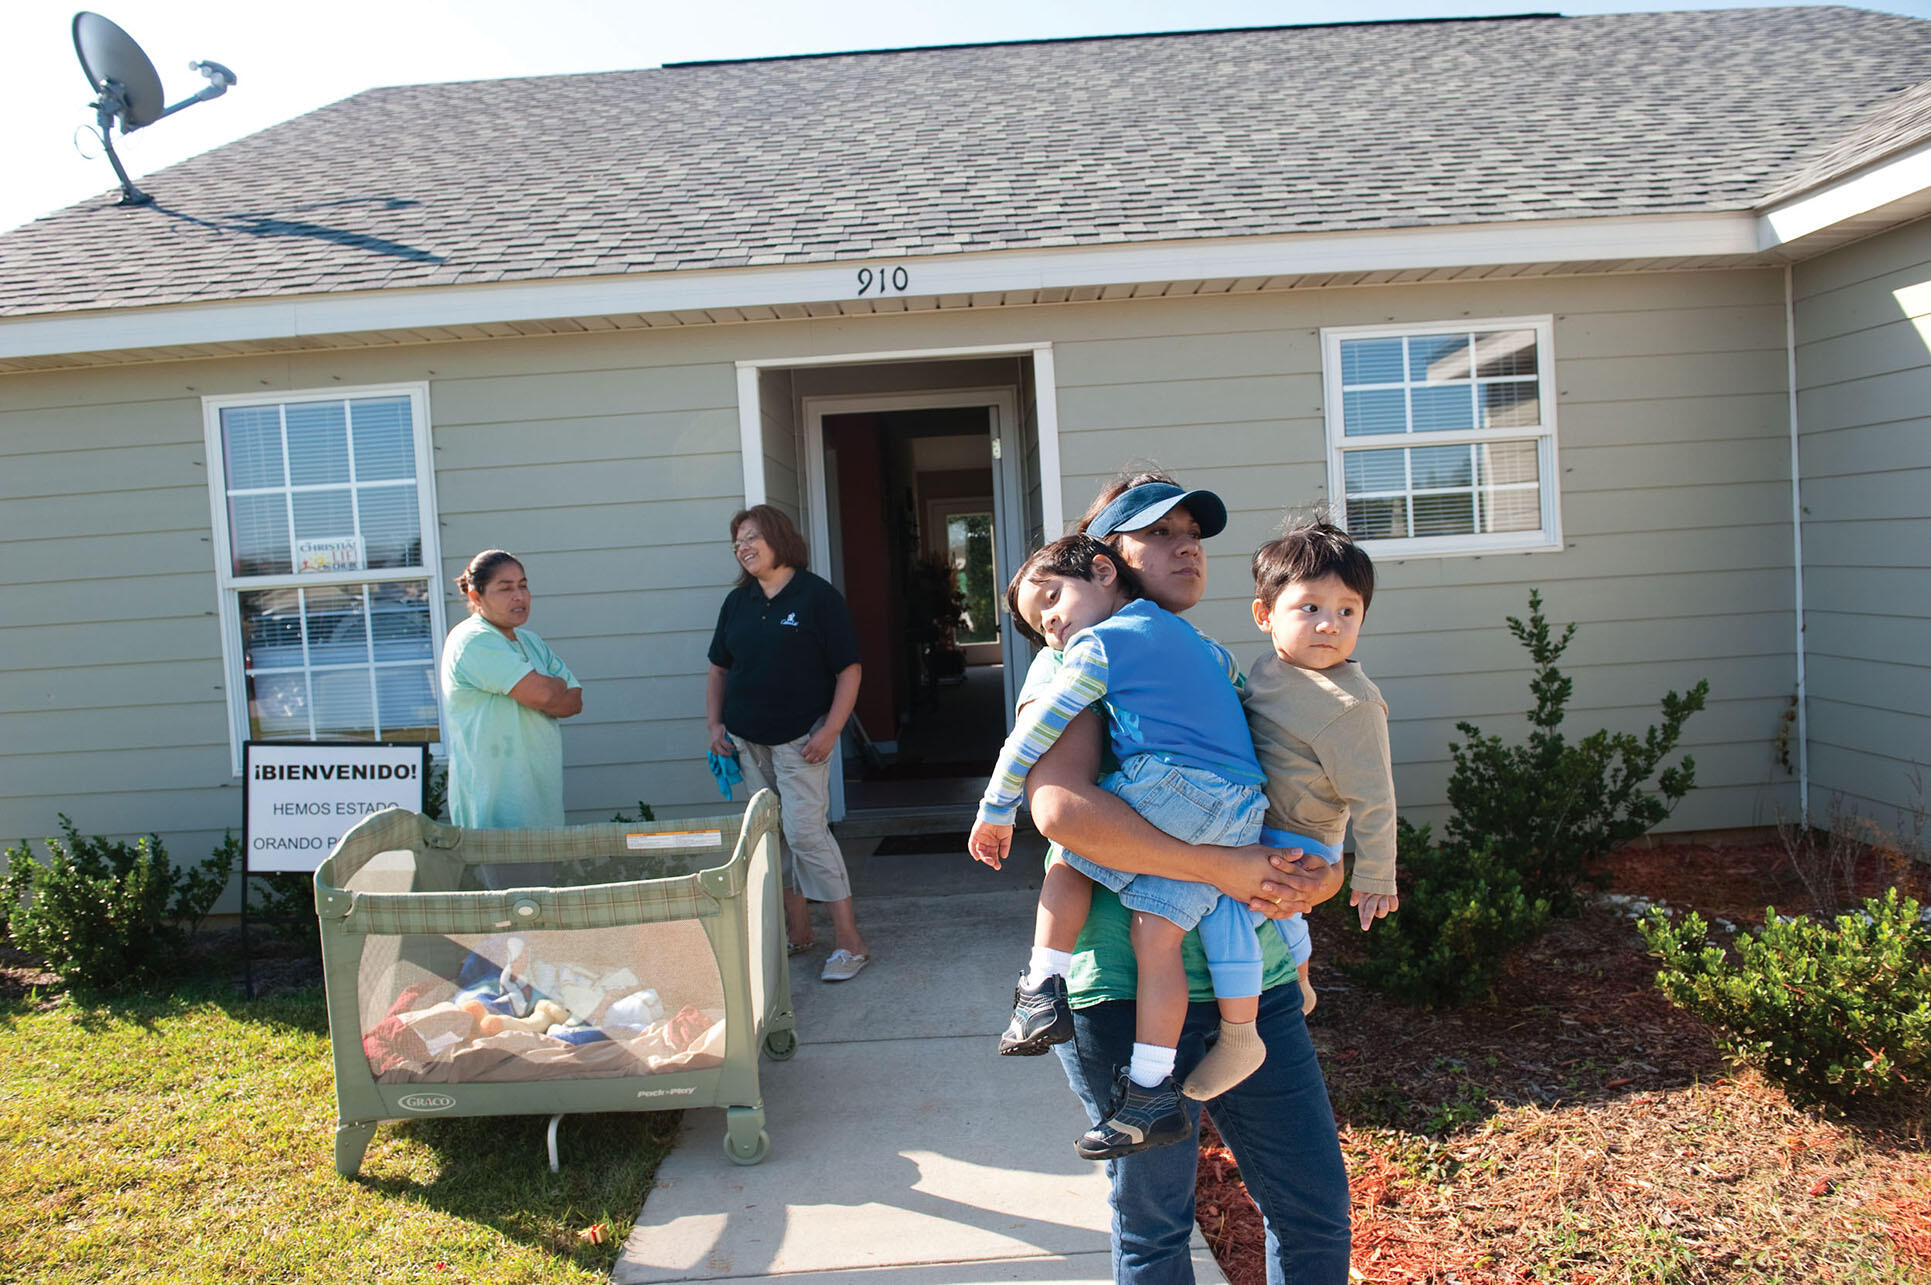 A Latino familiy with bags and boxes moves out of their Alabama home after the passage of immigration law HB56. (Photo from The Washington Post/Getty Images.)